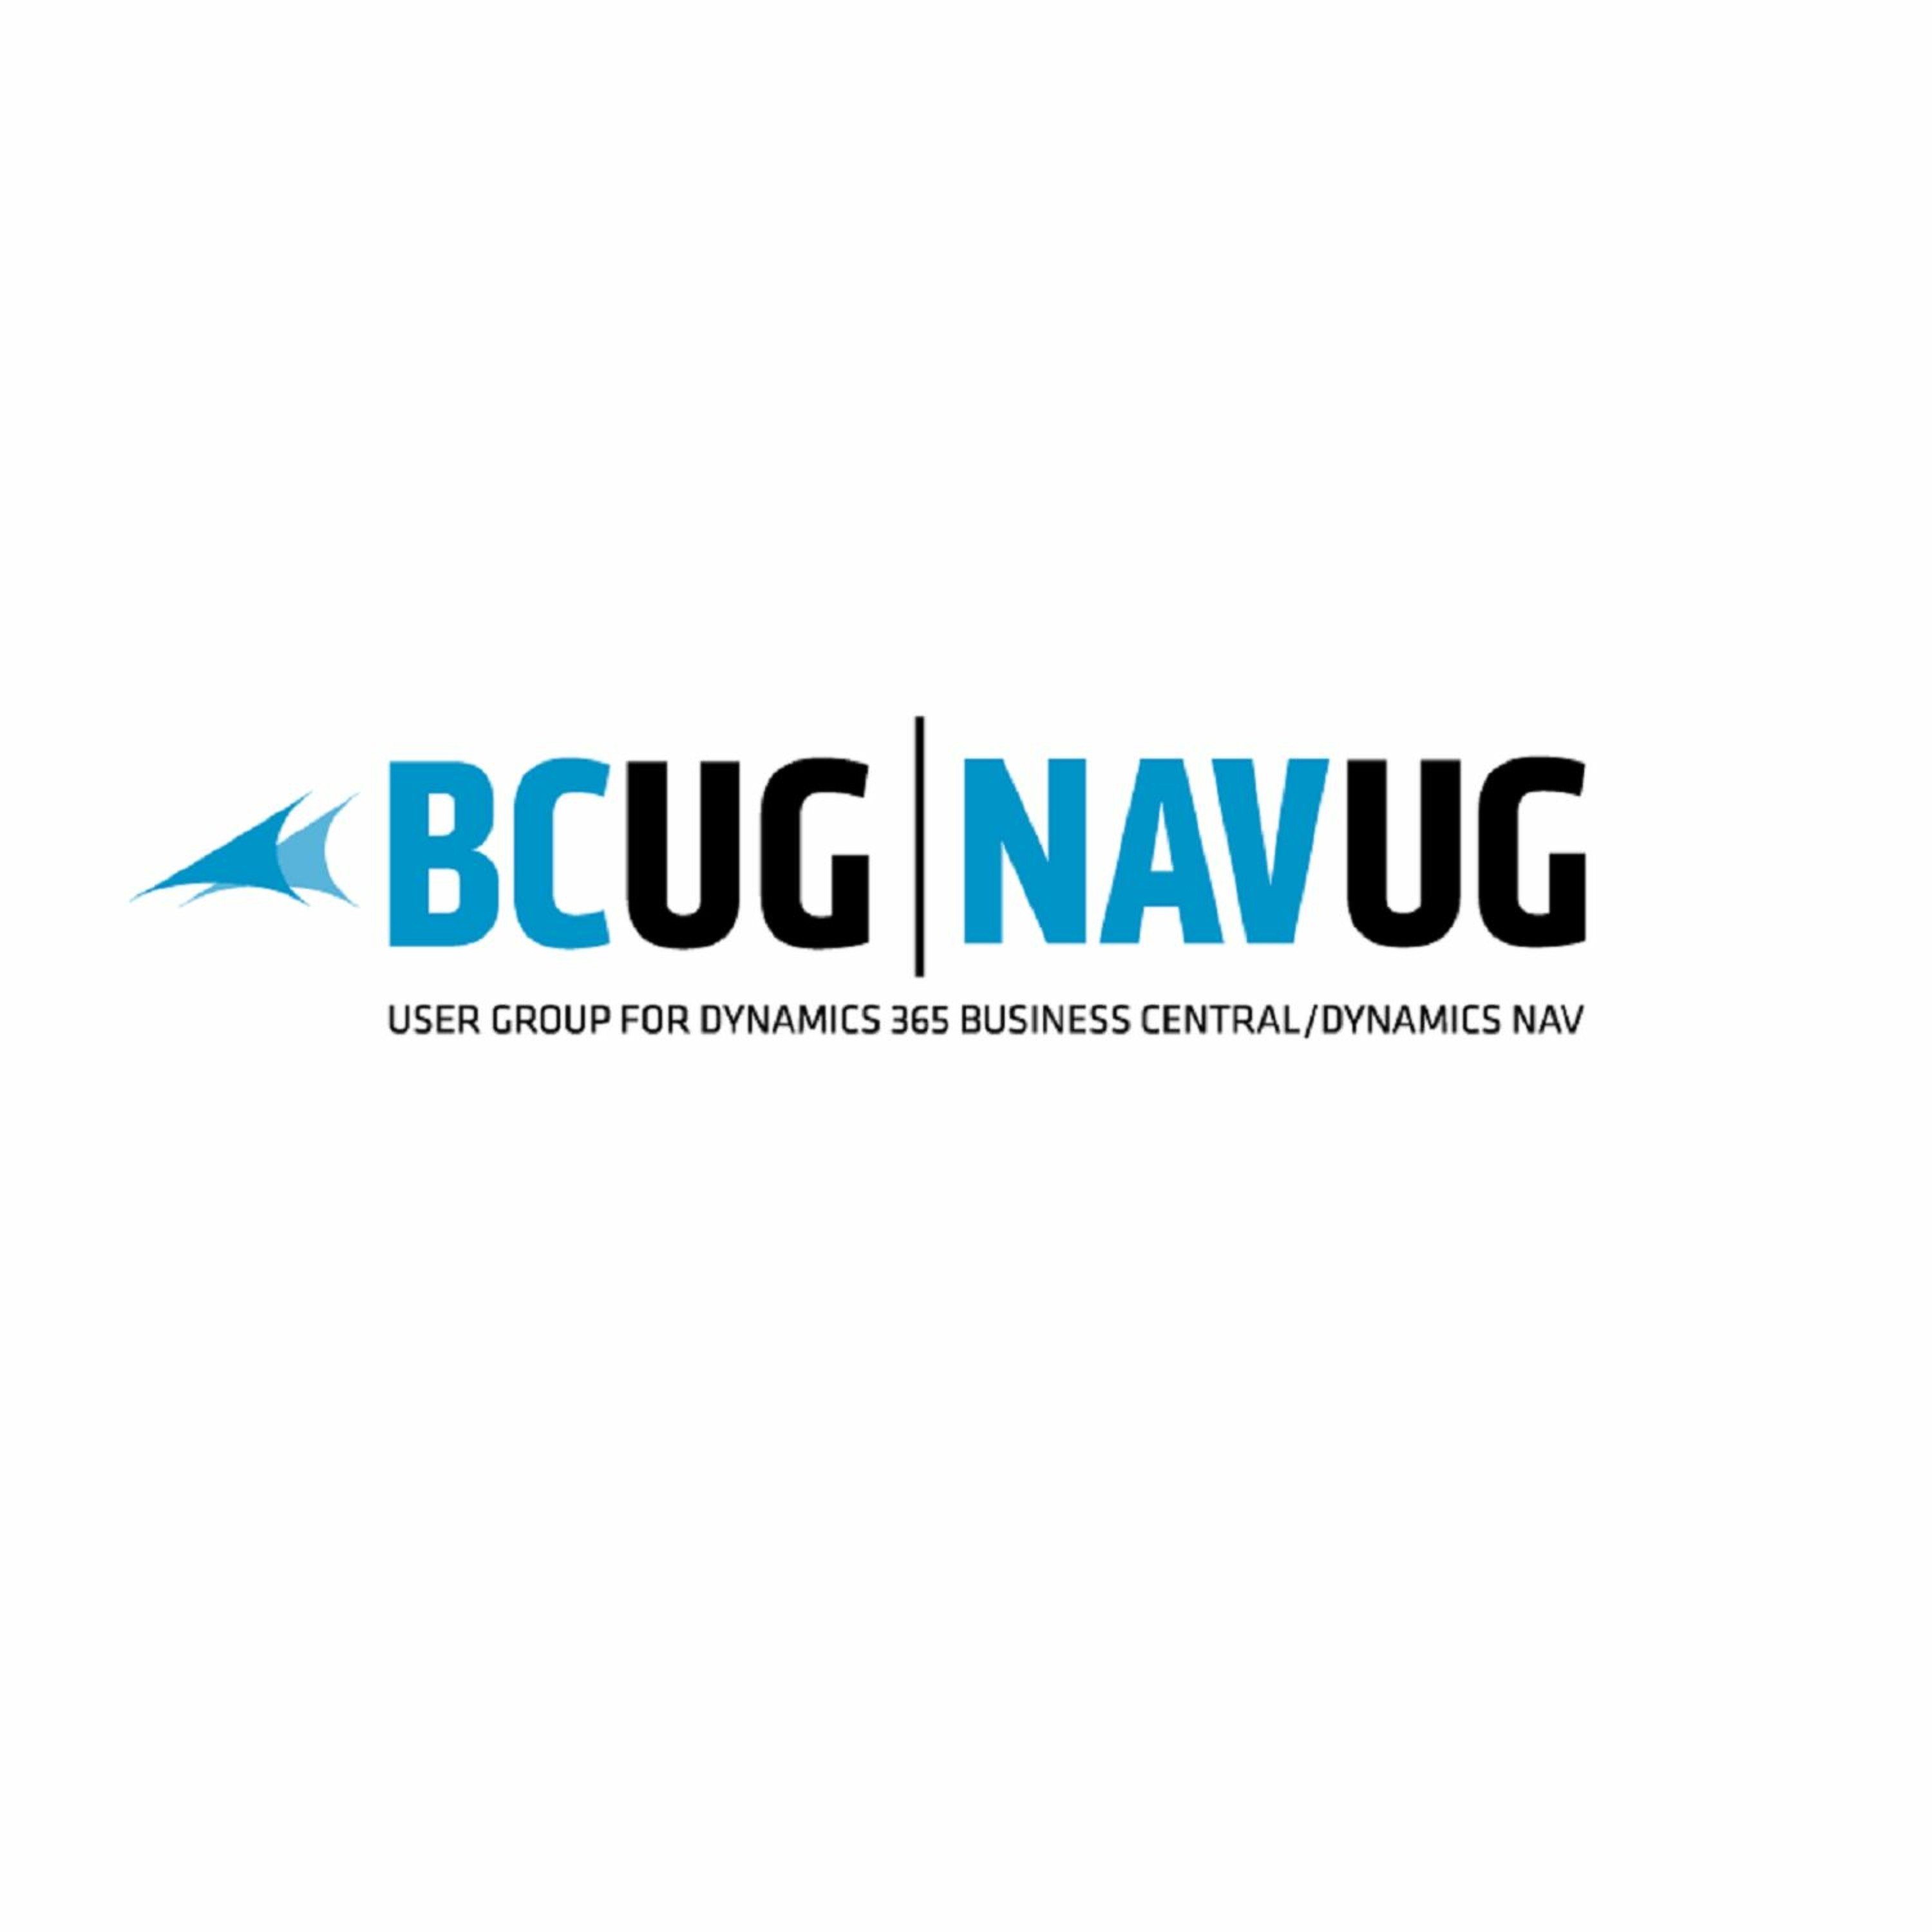 BCUG - NAVUG WOTM - New Features In Business Central May 2019